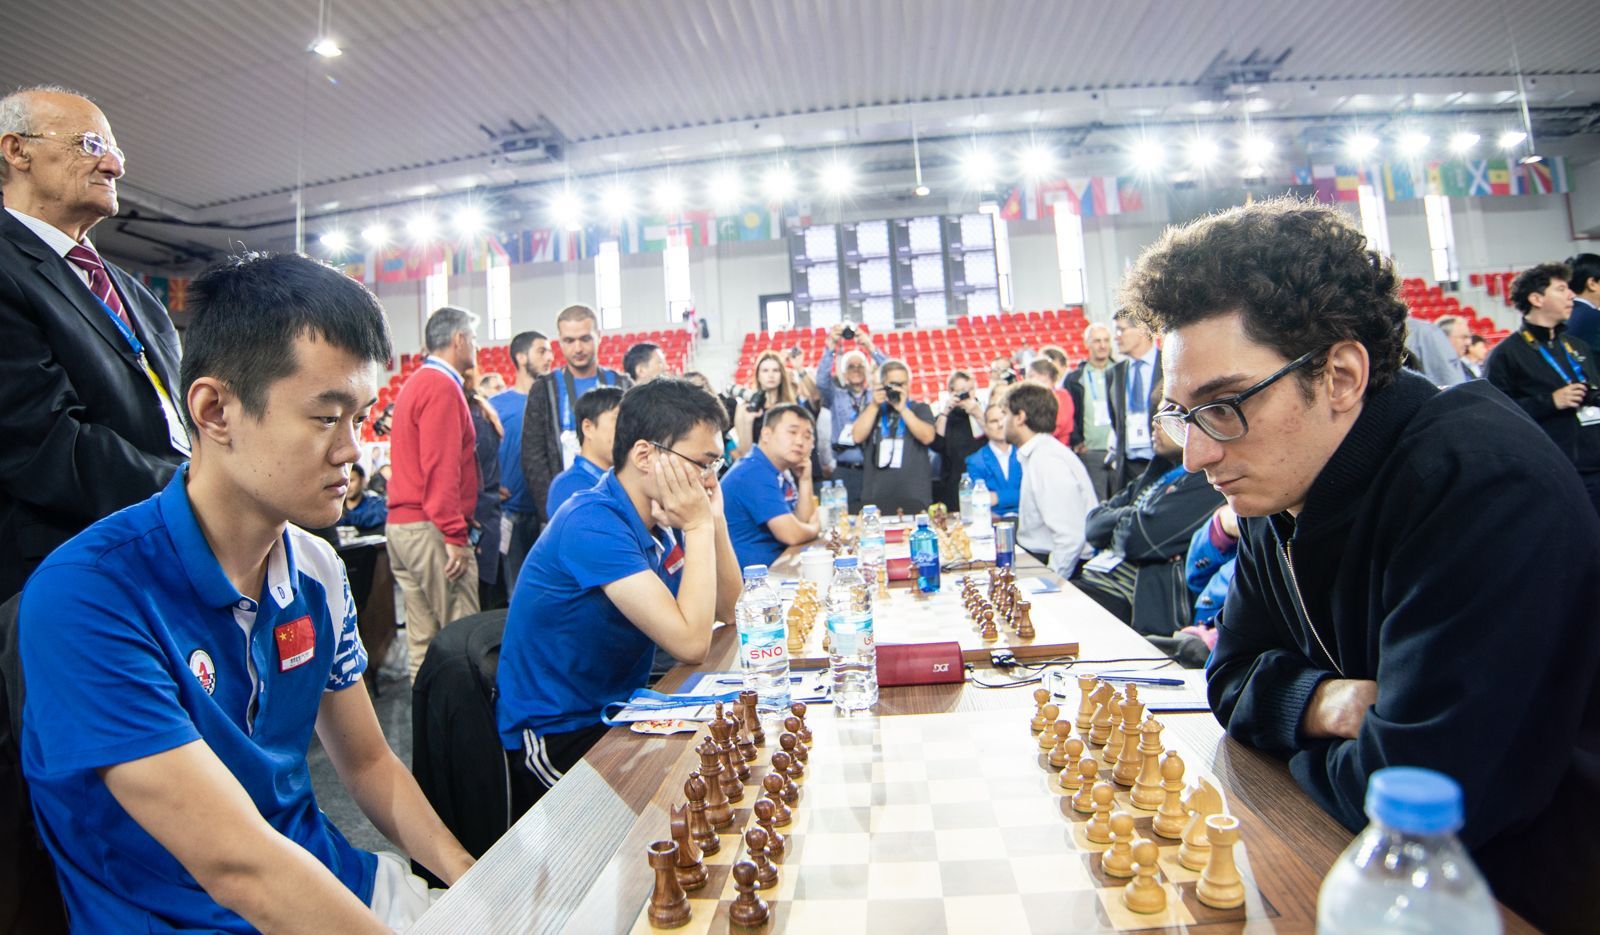 Ding vs Caruana at the 2018 Chess Olympiads